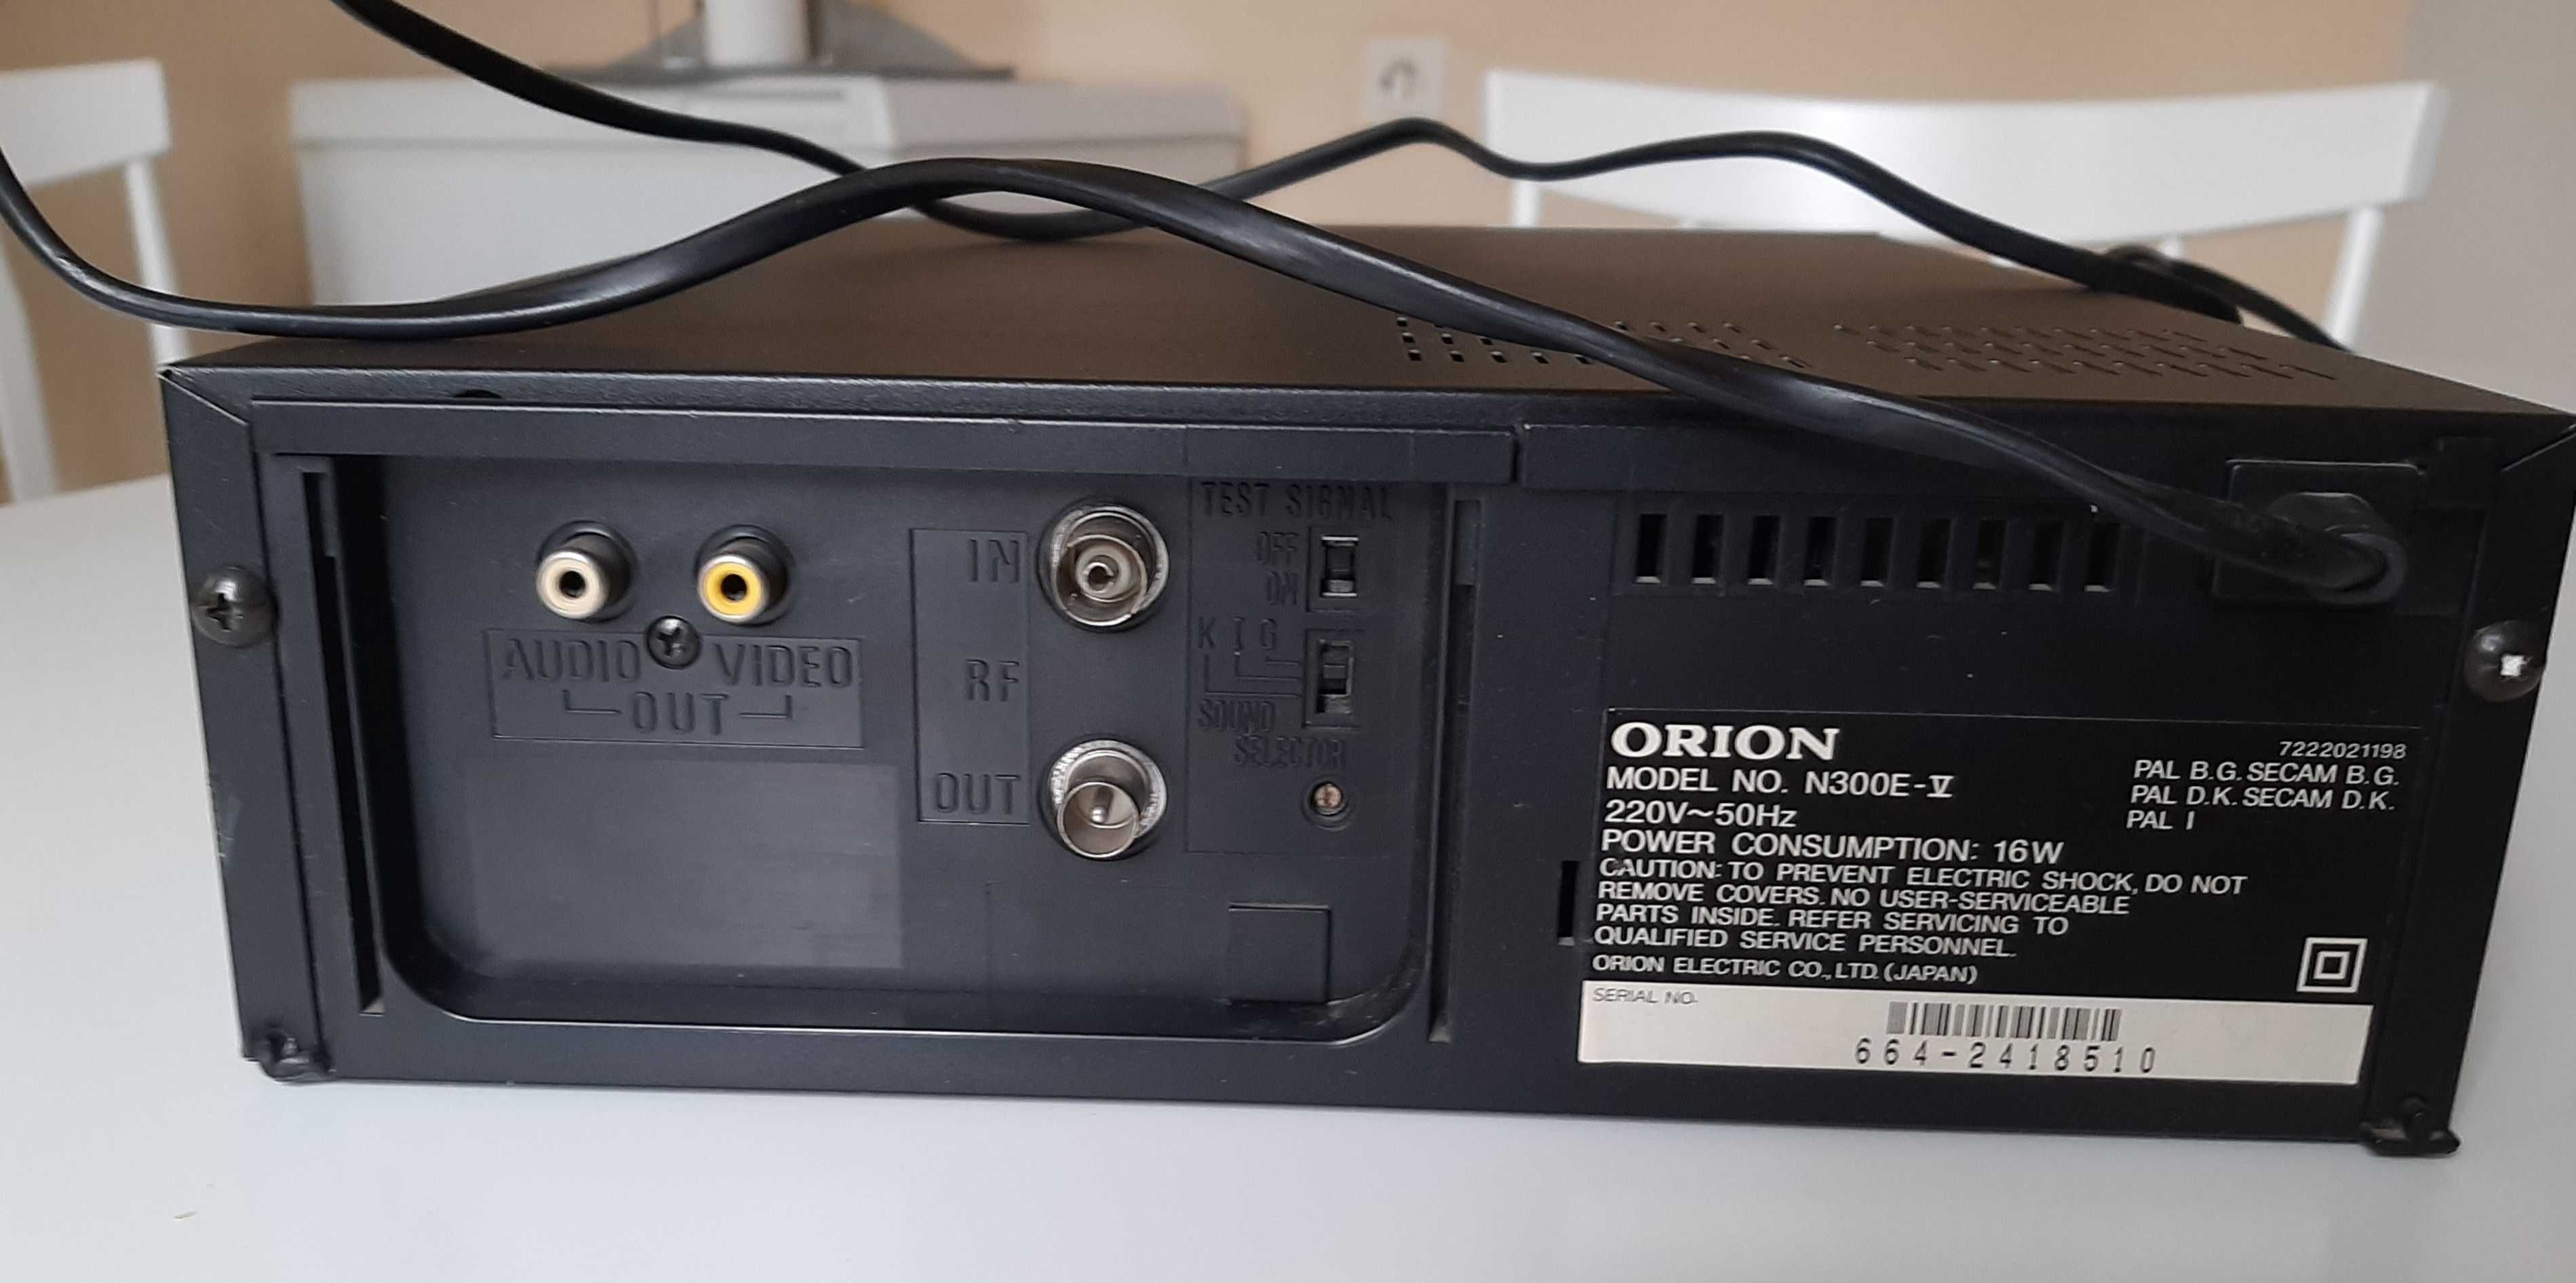 Video cassette player ORION